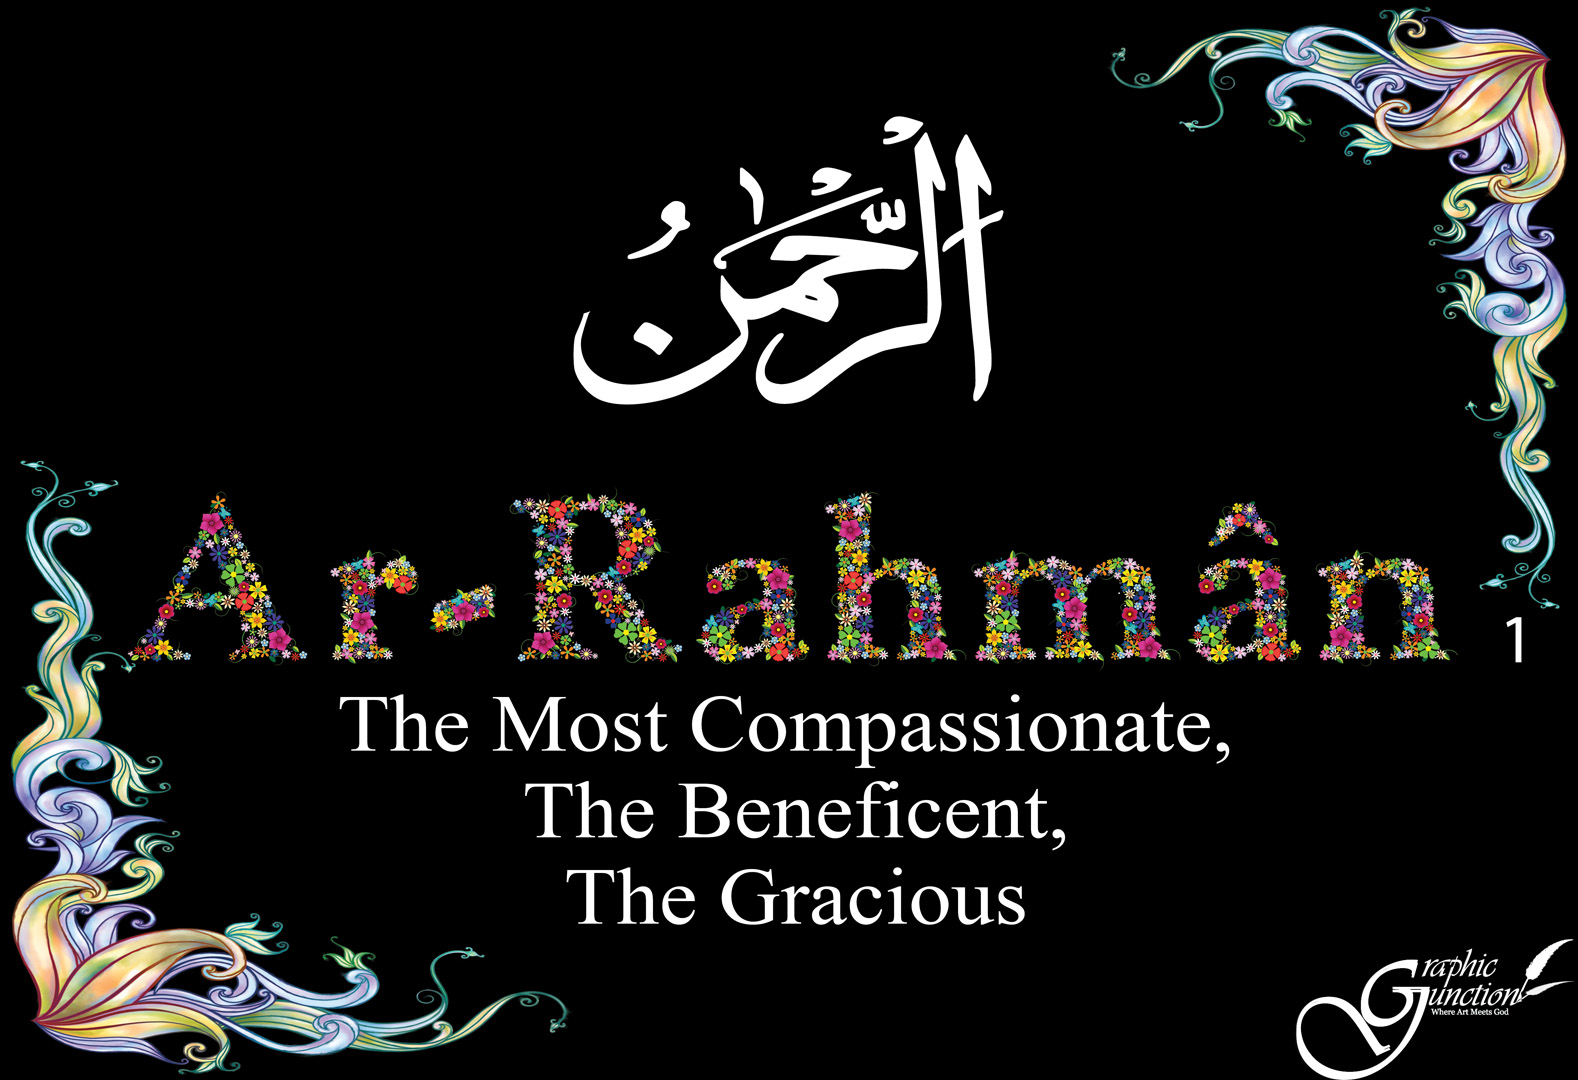 Ar-Rahman - The Compassionate, The Beneficent, The Gracious